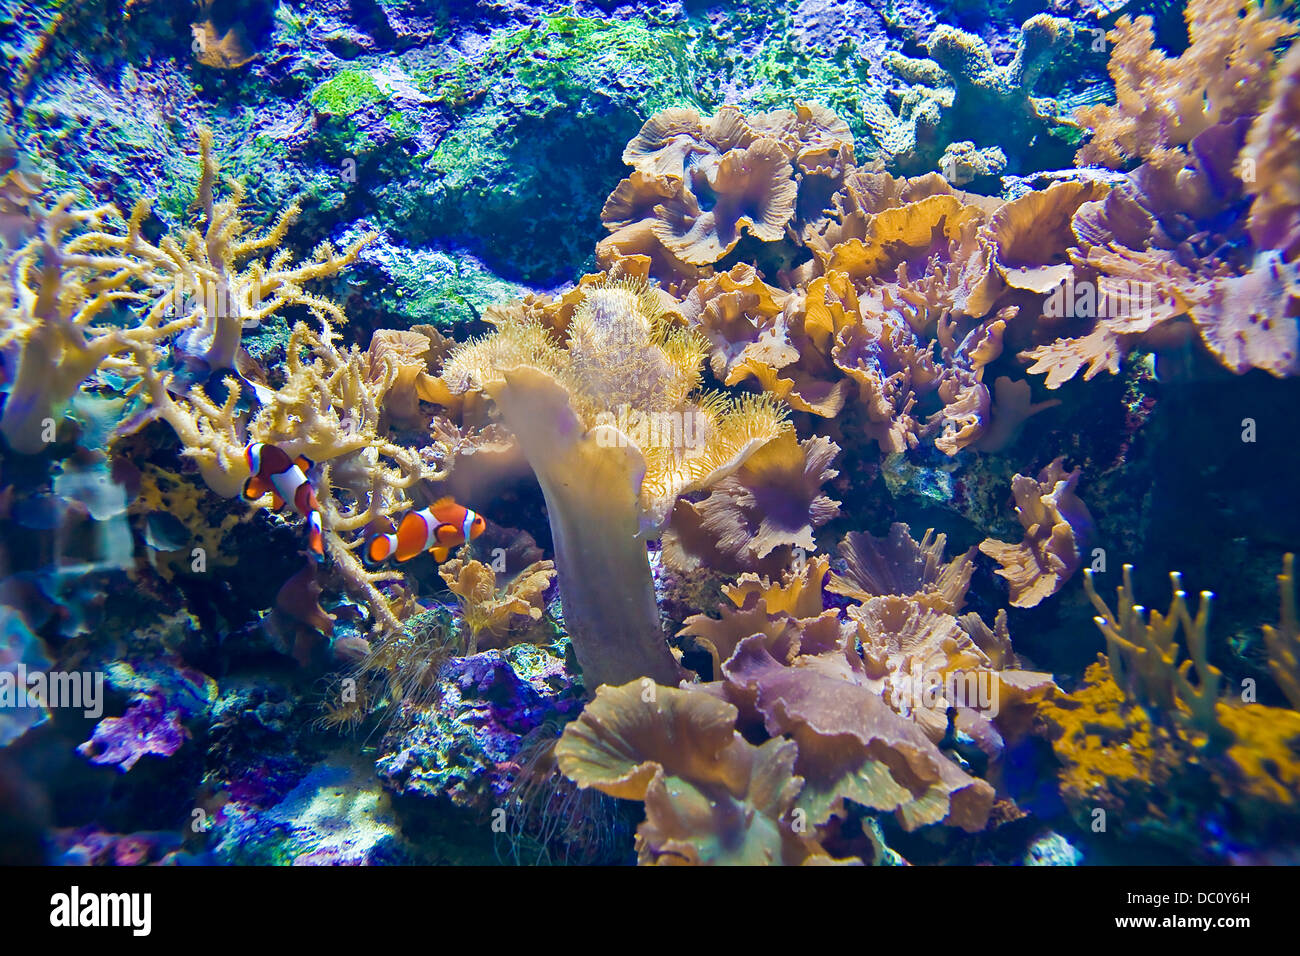 Sea anemone on coral reef with fish and a variety of corals Stock Photo